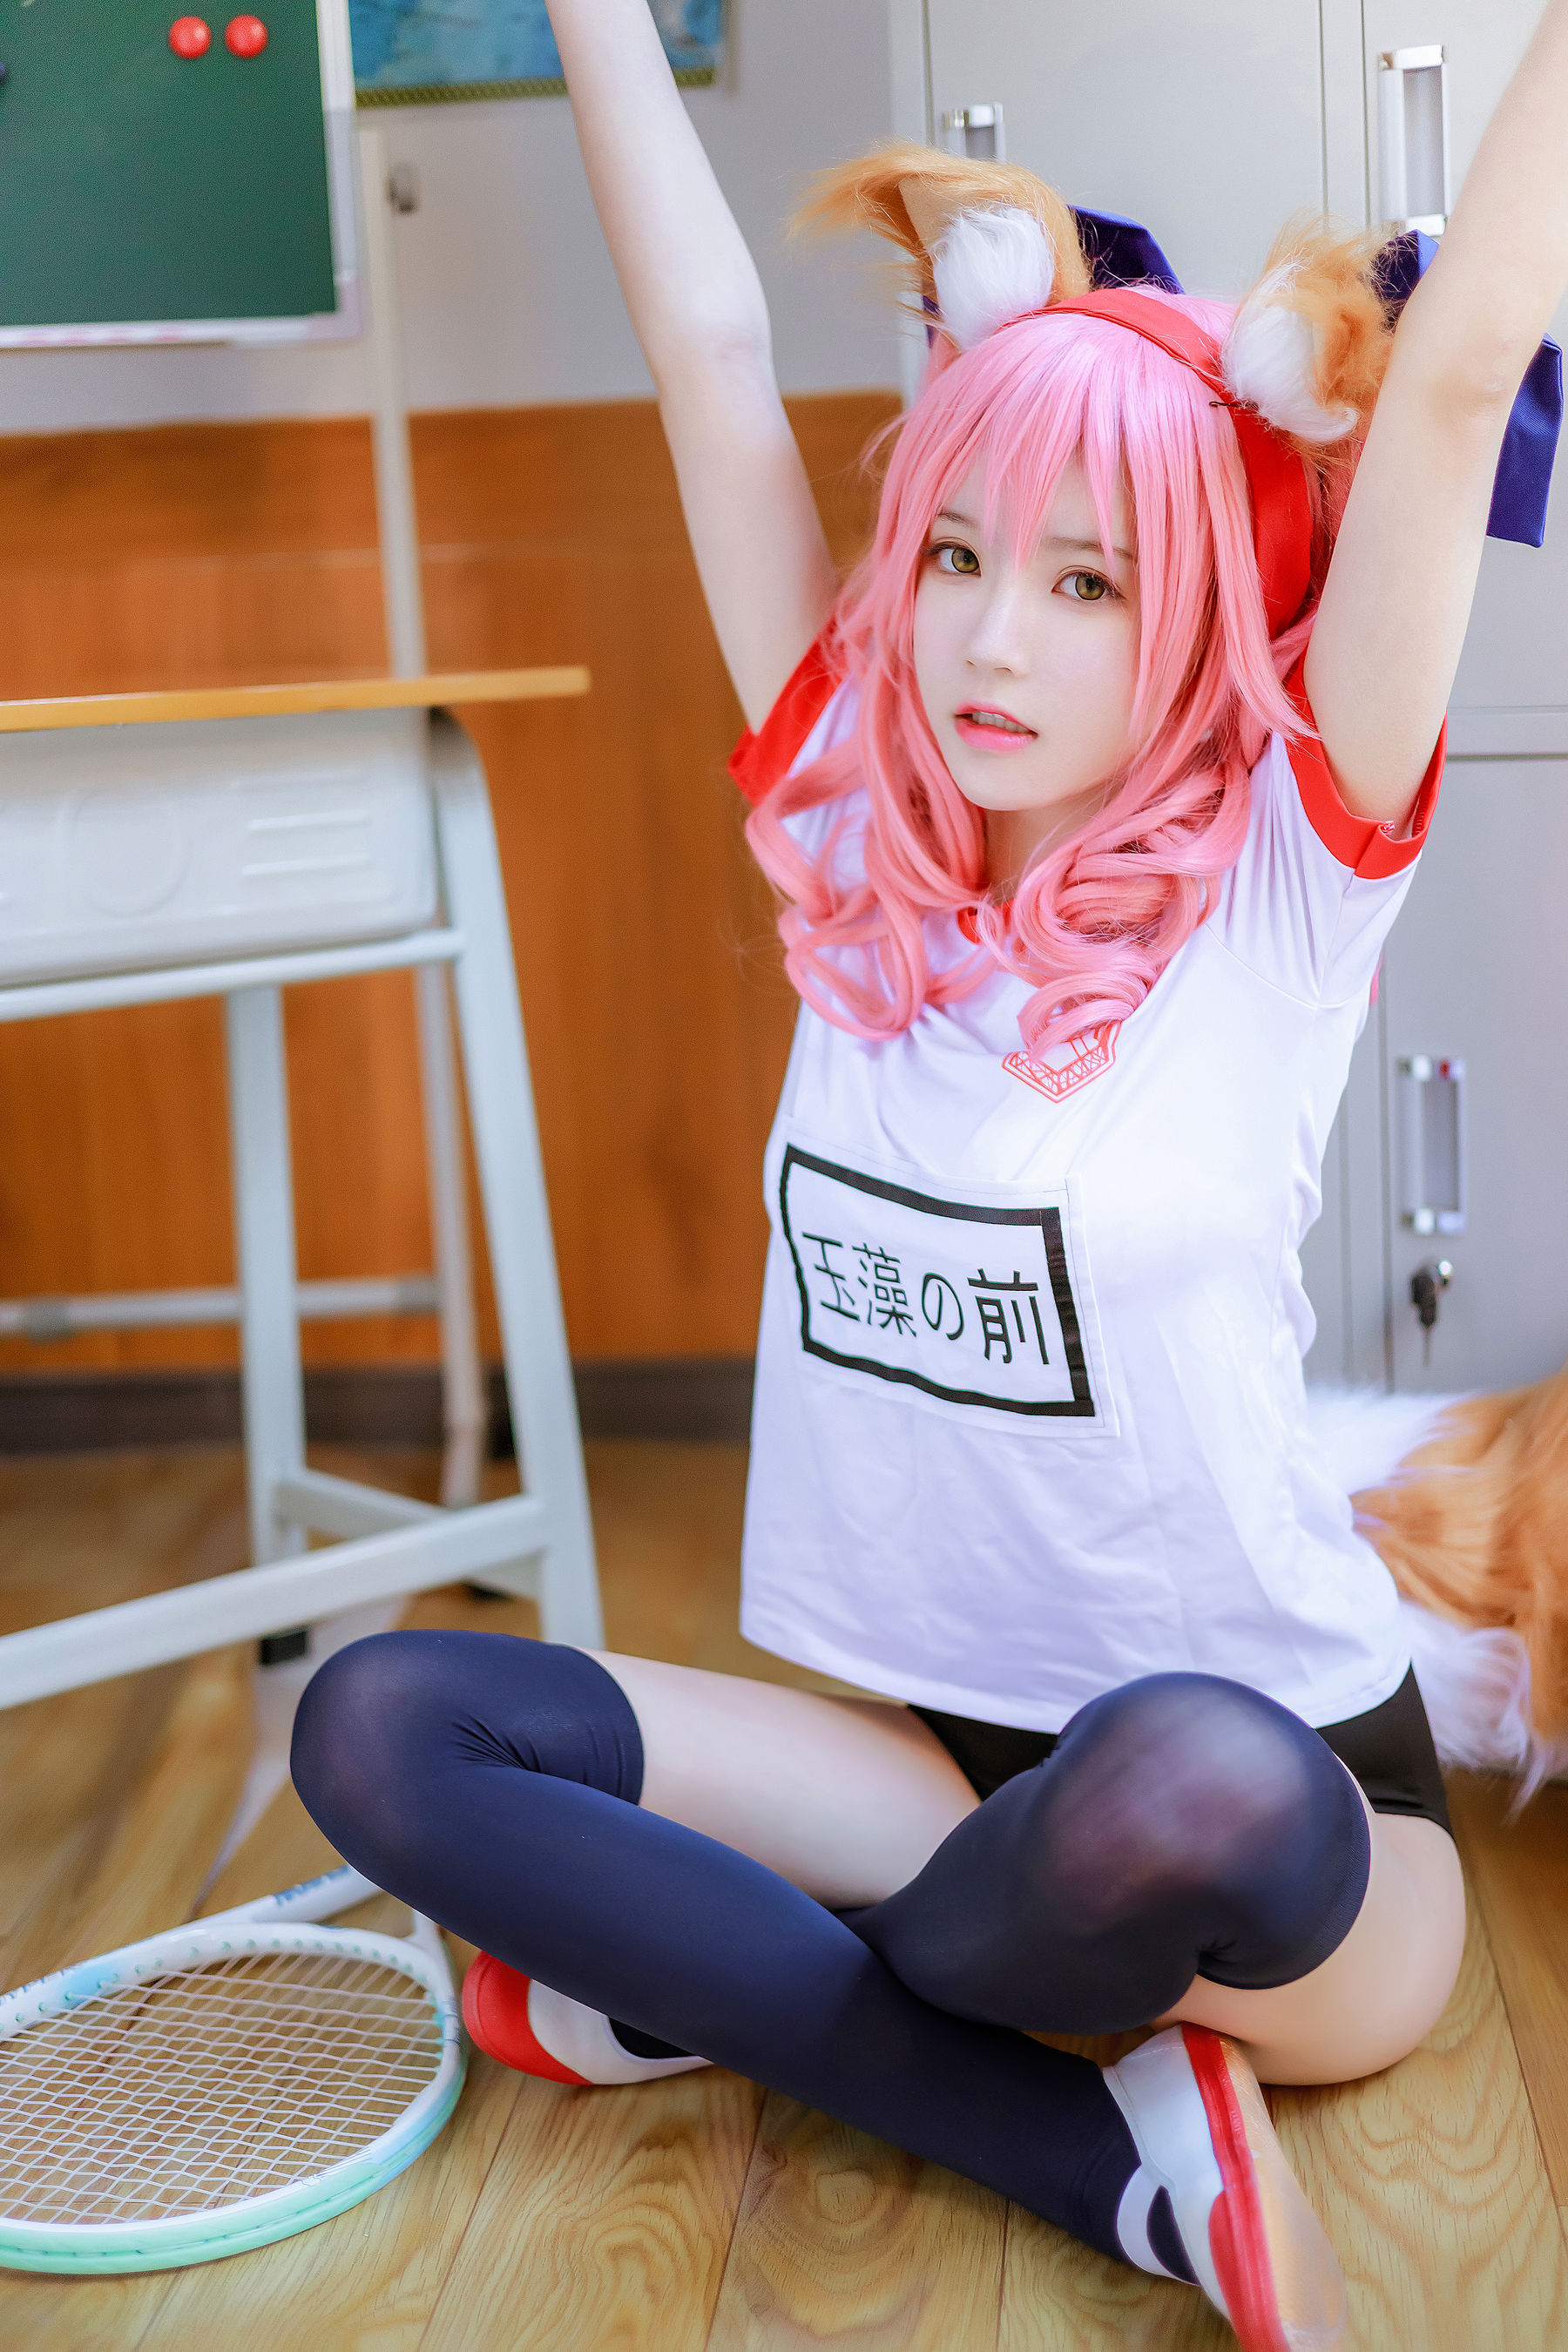 [Net Red COSER Photo] Cherry Peach Meow - Tamamo former gym suit Page 8 No.47ef0a